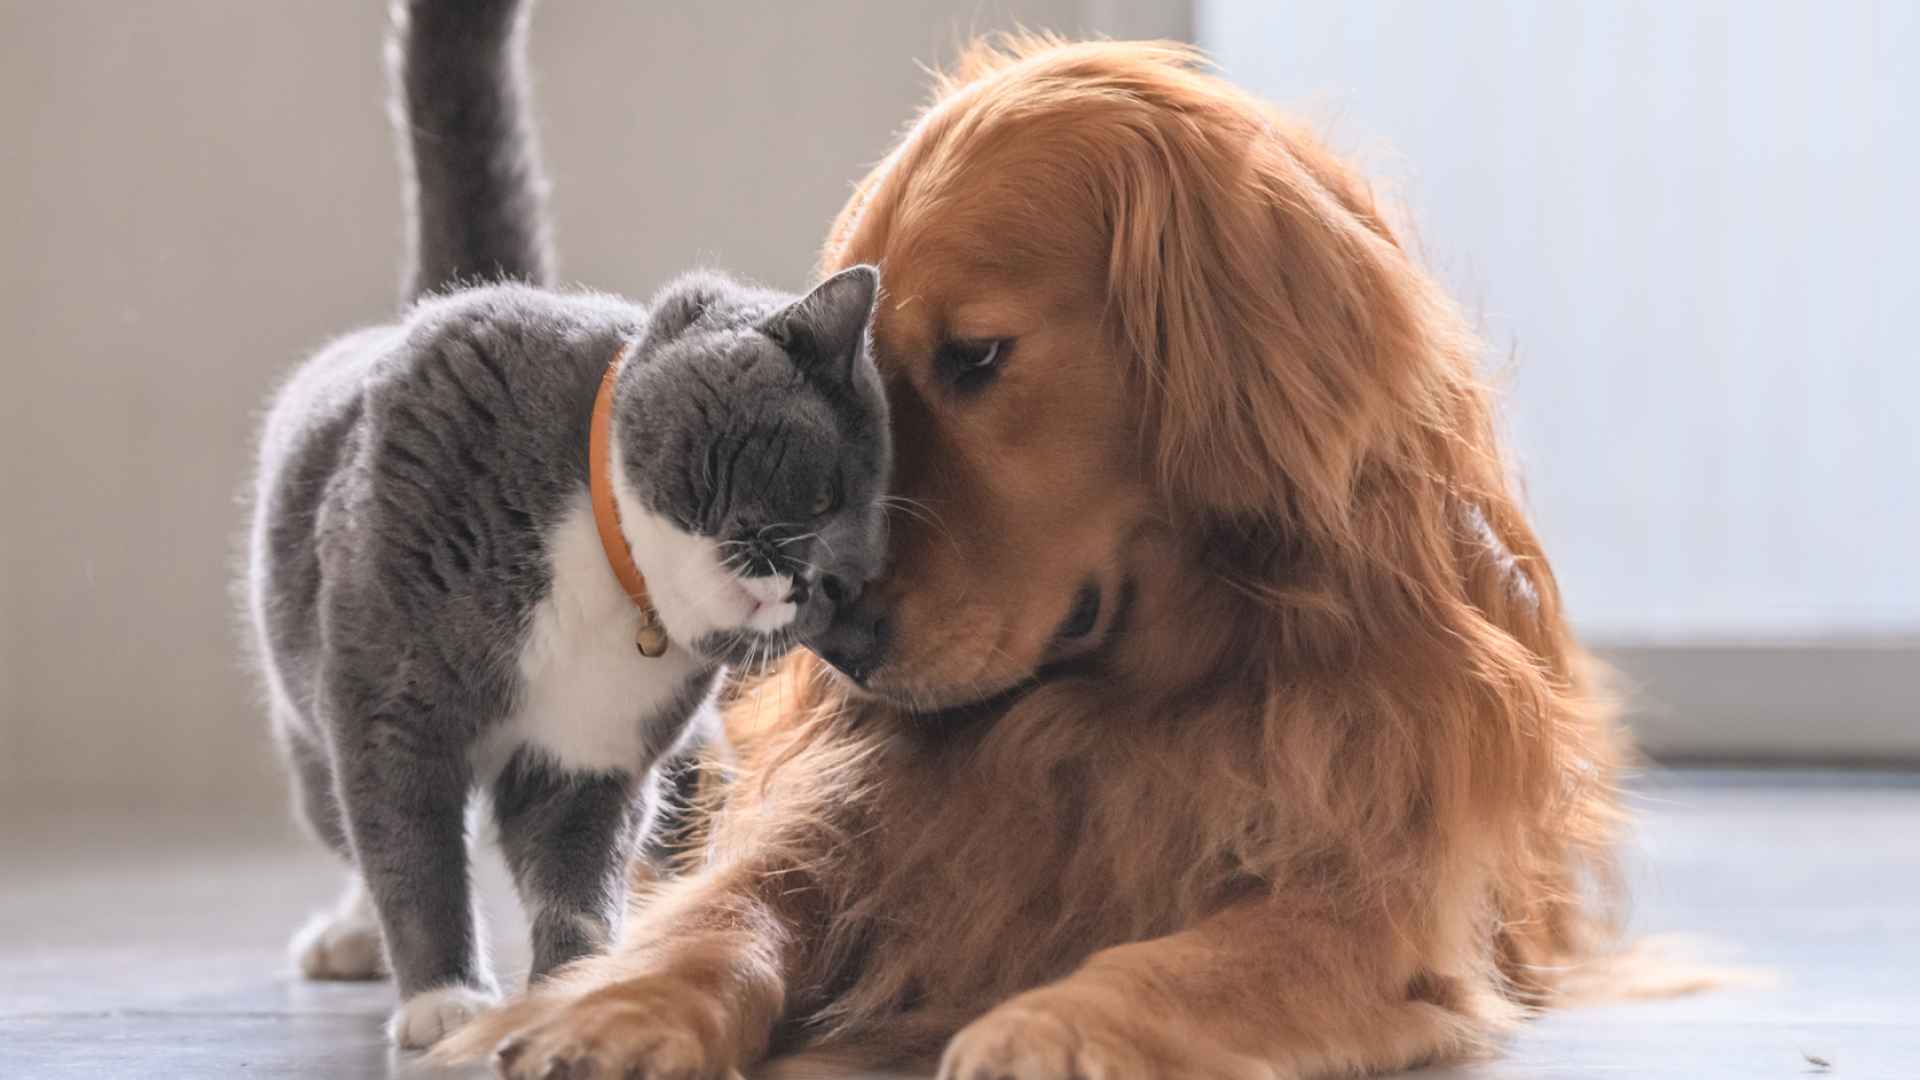 Dog and Cat playing